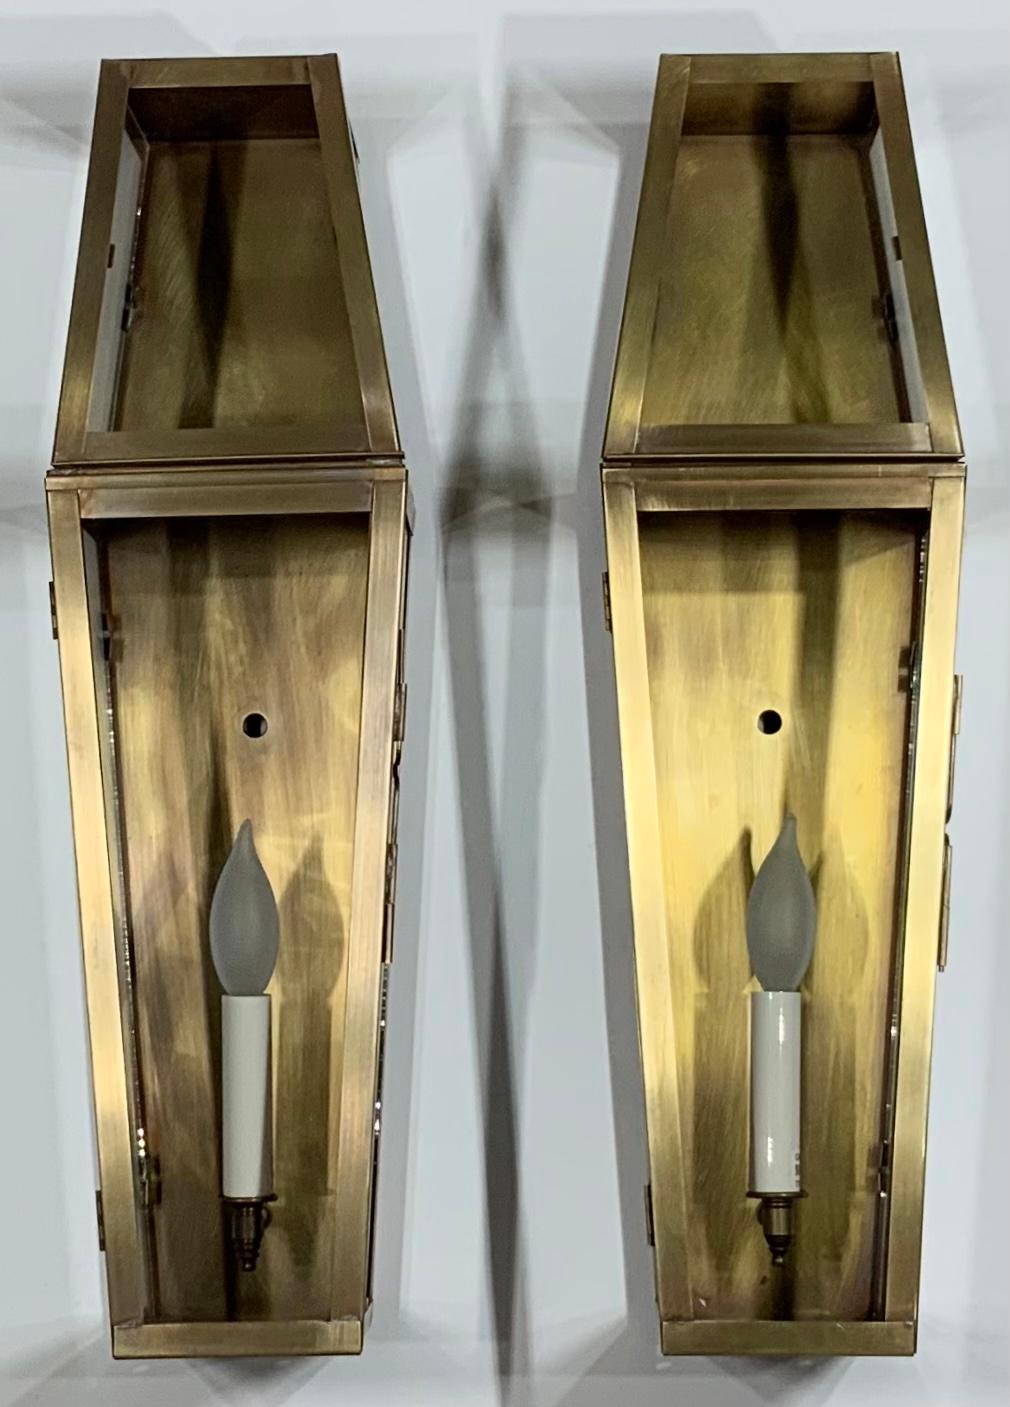 Elegant pair of wall lantern made of solid brass, exceptional quality workmanship, electrified with one 60/watt light each, clear glass.
Suitable for wet location, UL approved, up to US code.
Decorative pair of lantern for indoor or outdoor.